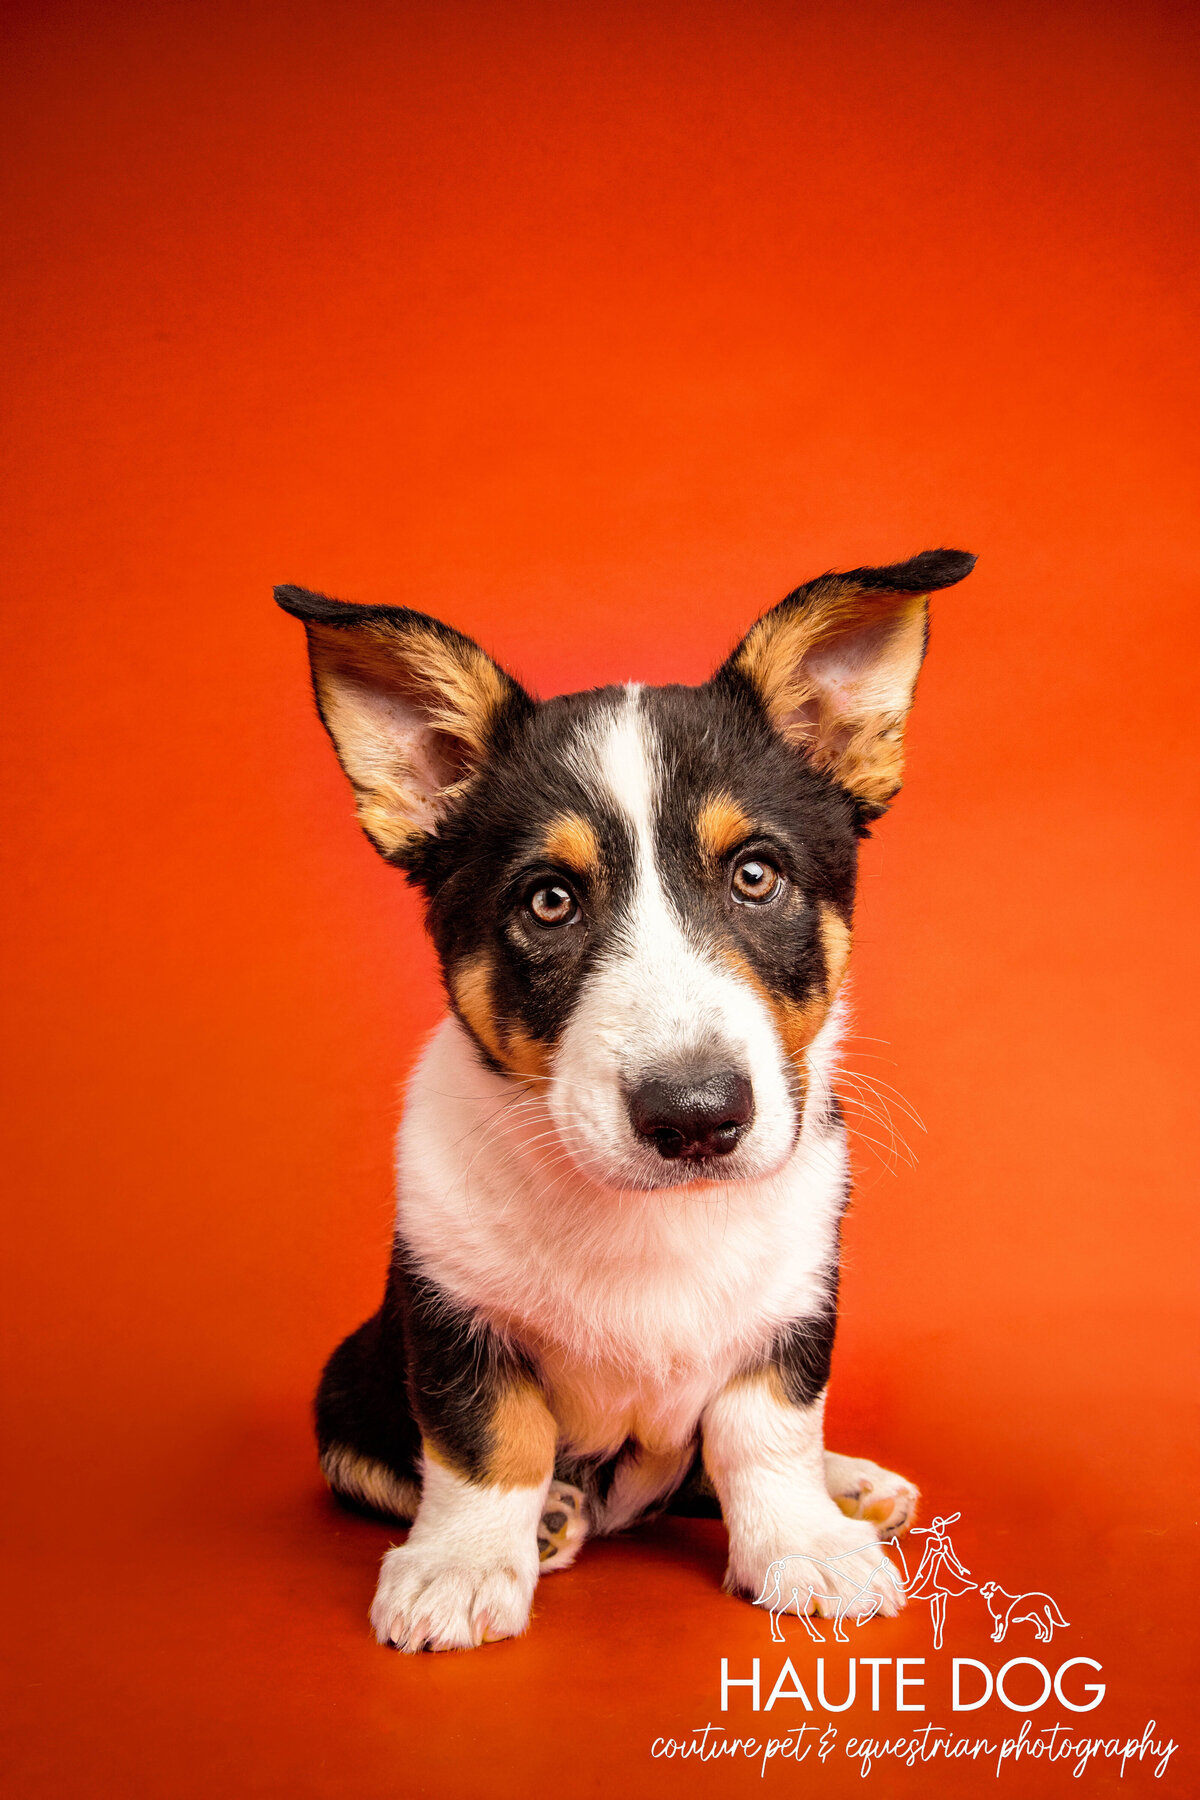 Corgi puppy with big ears and short legs, sitting on an orange background, with a playful and curious expression on its face.